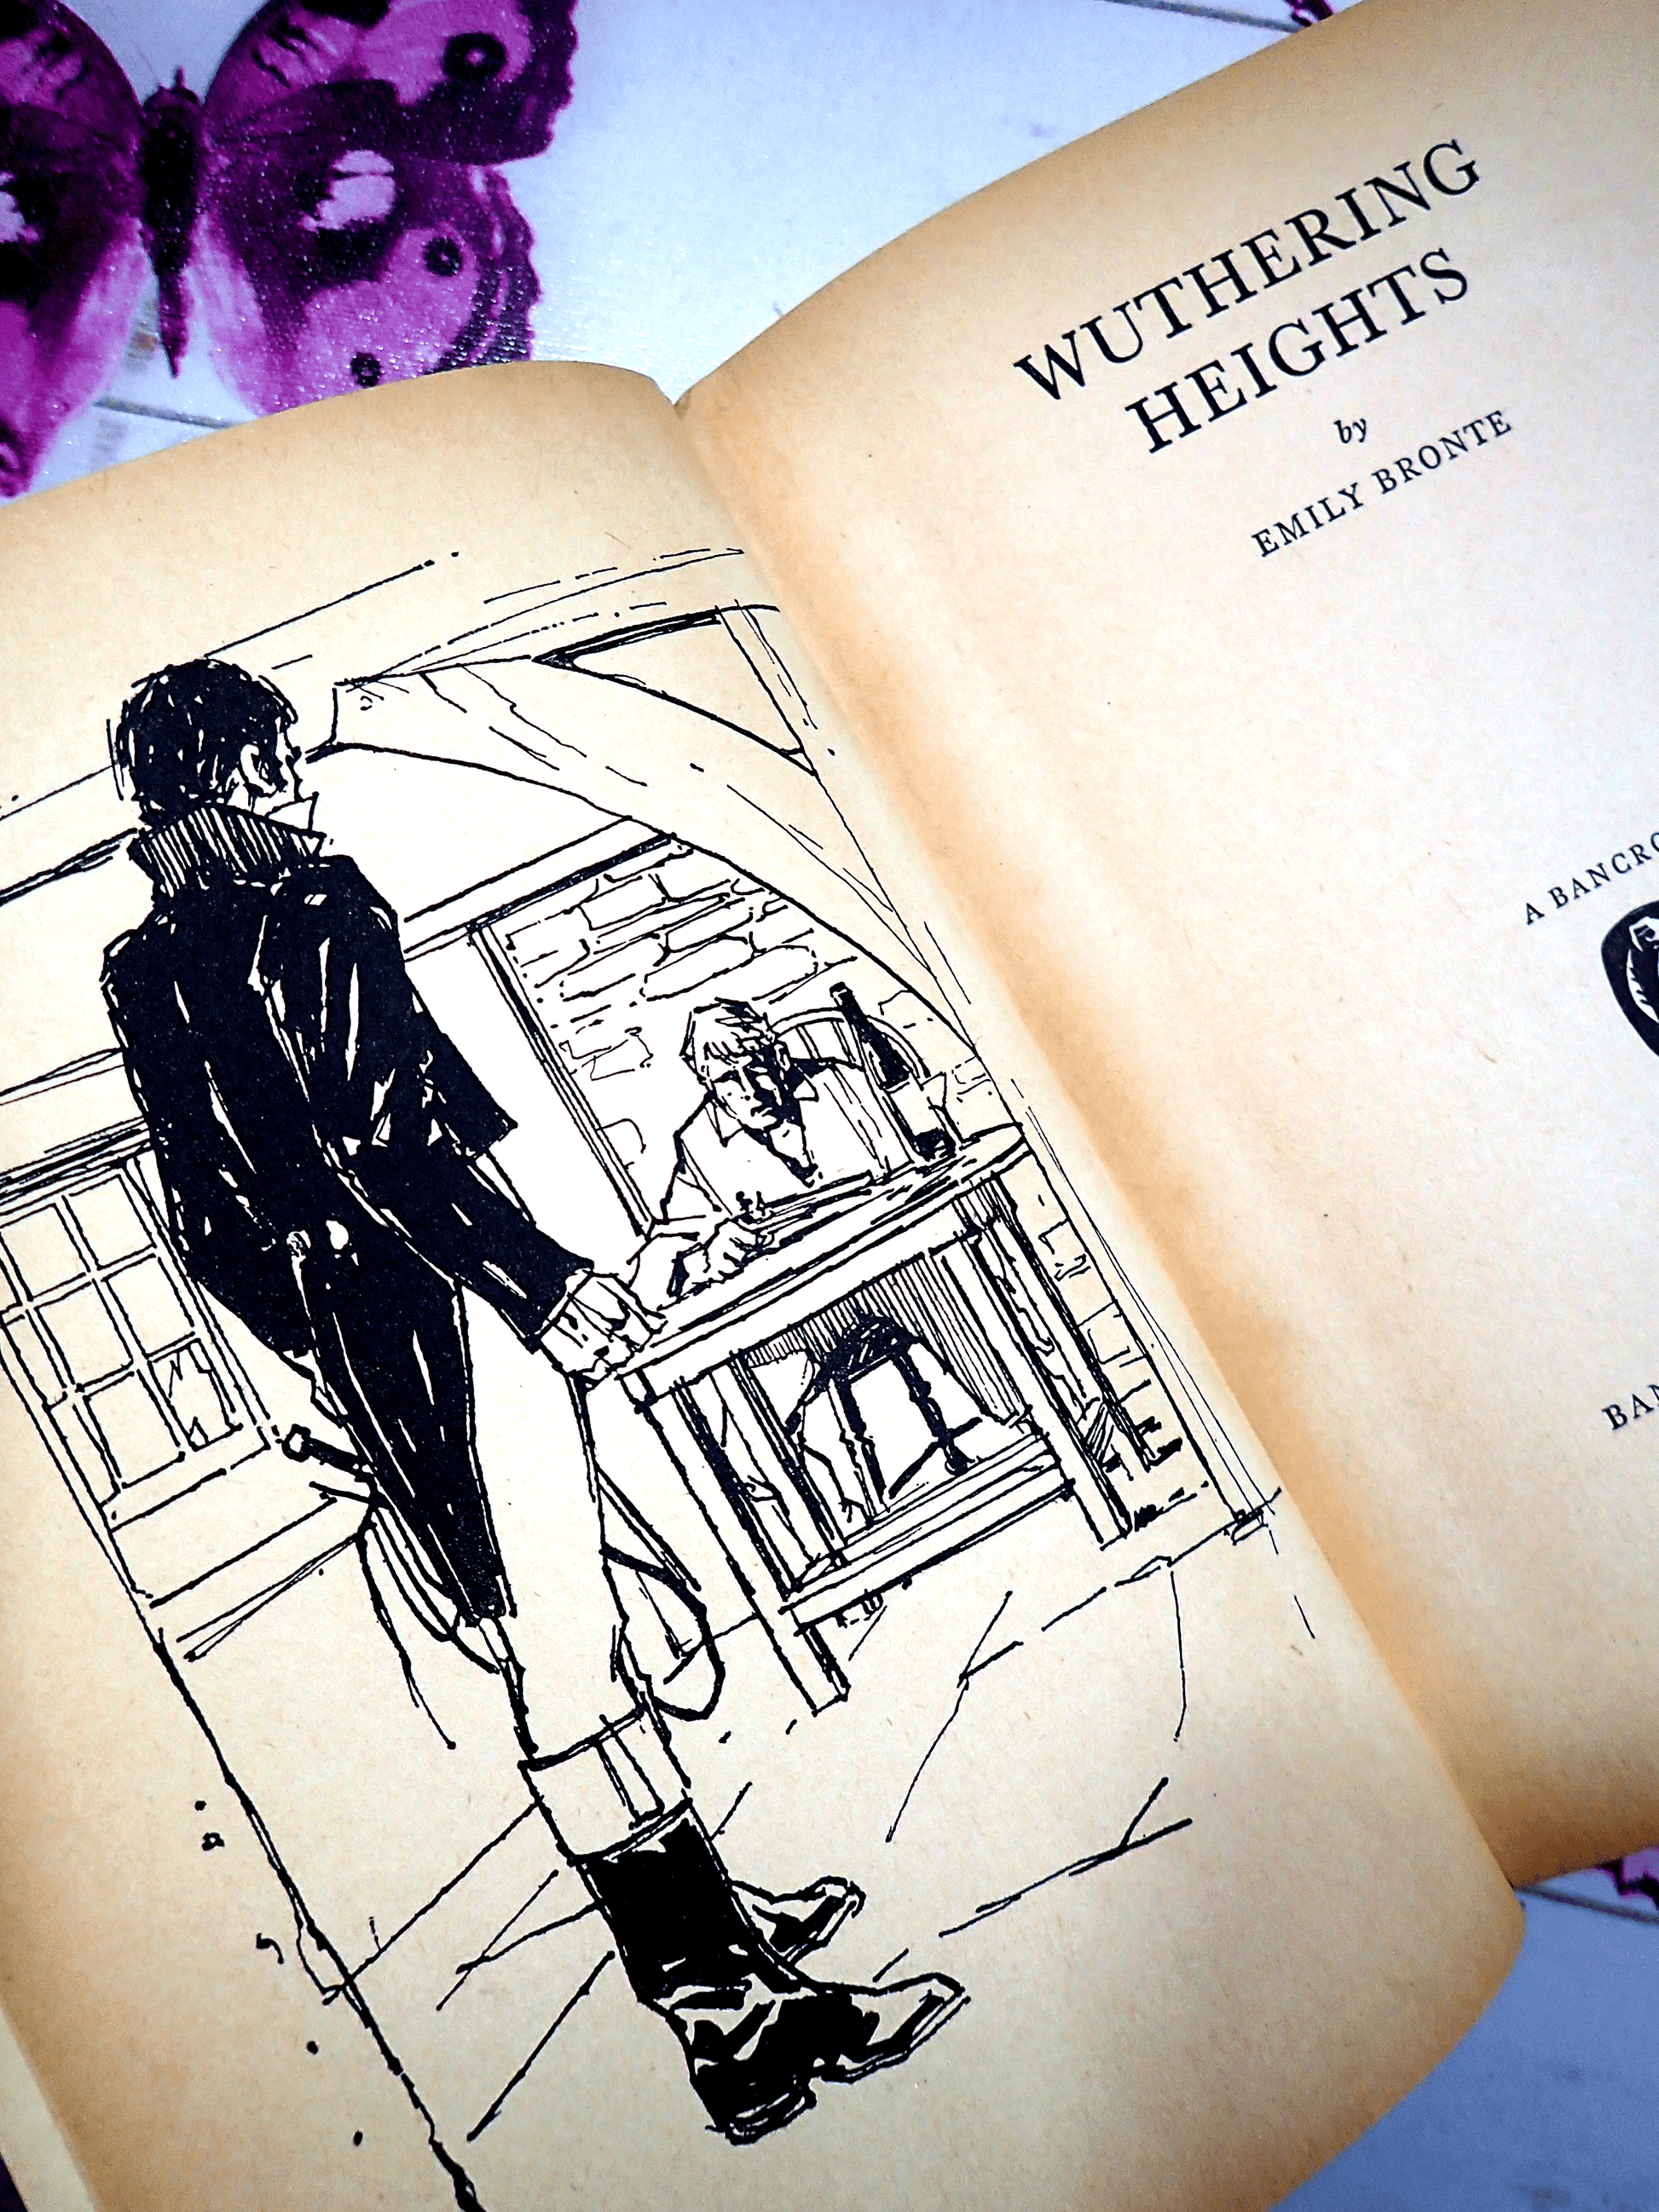 Wuthering Heights Emily Bronte Bancroft Classics 1960's Vintage Book H –  Kittys Tales